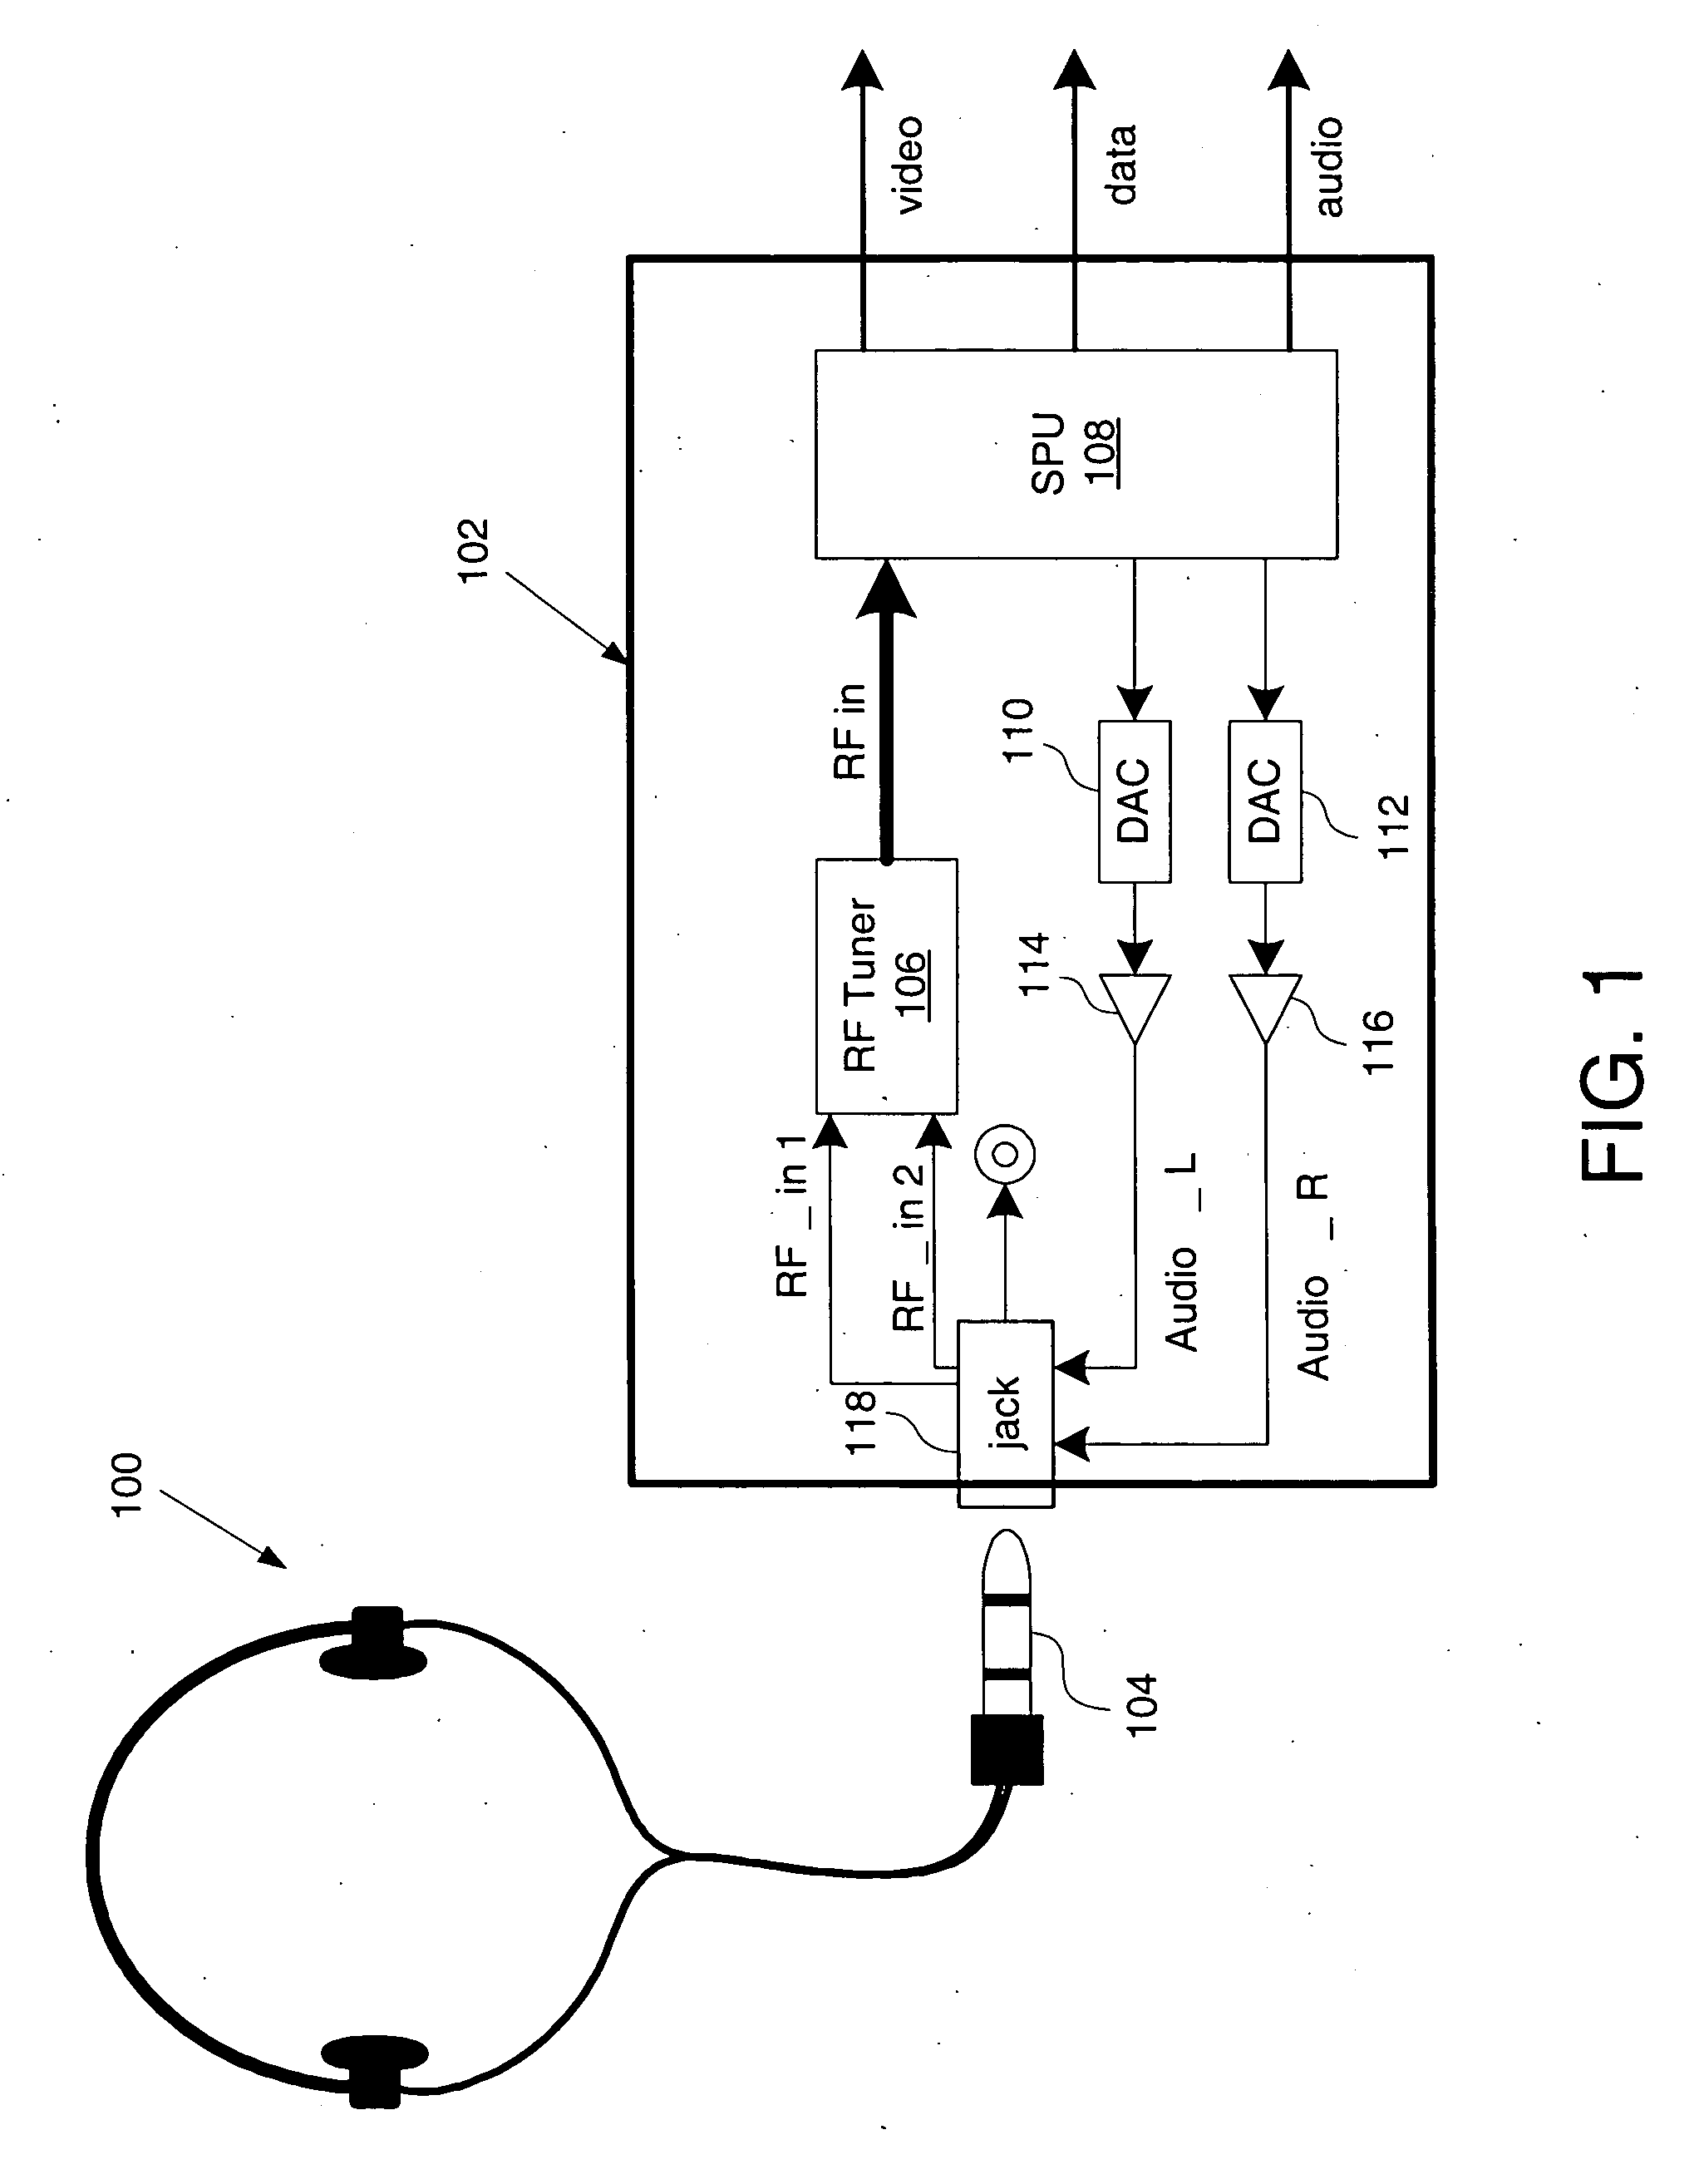 Mobile device multi-antenna system